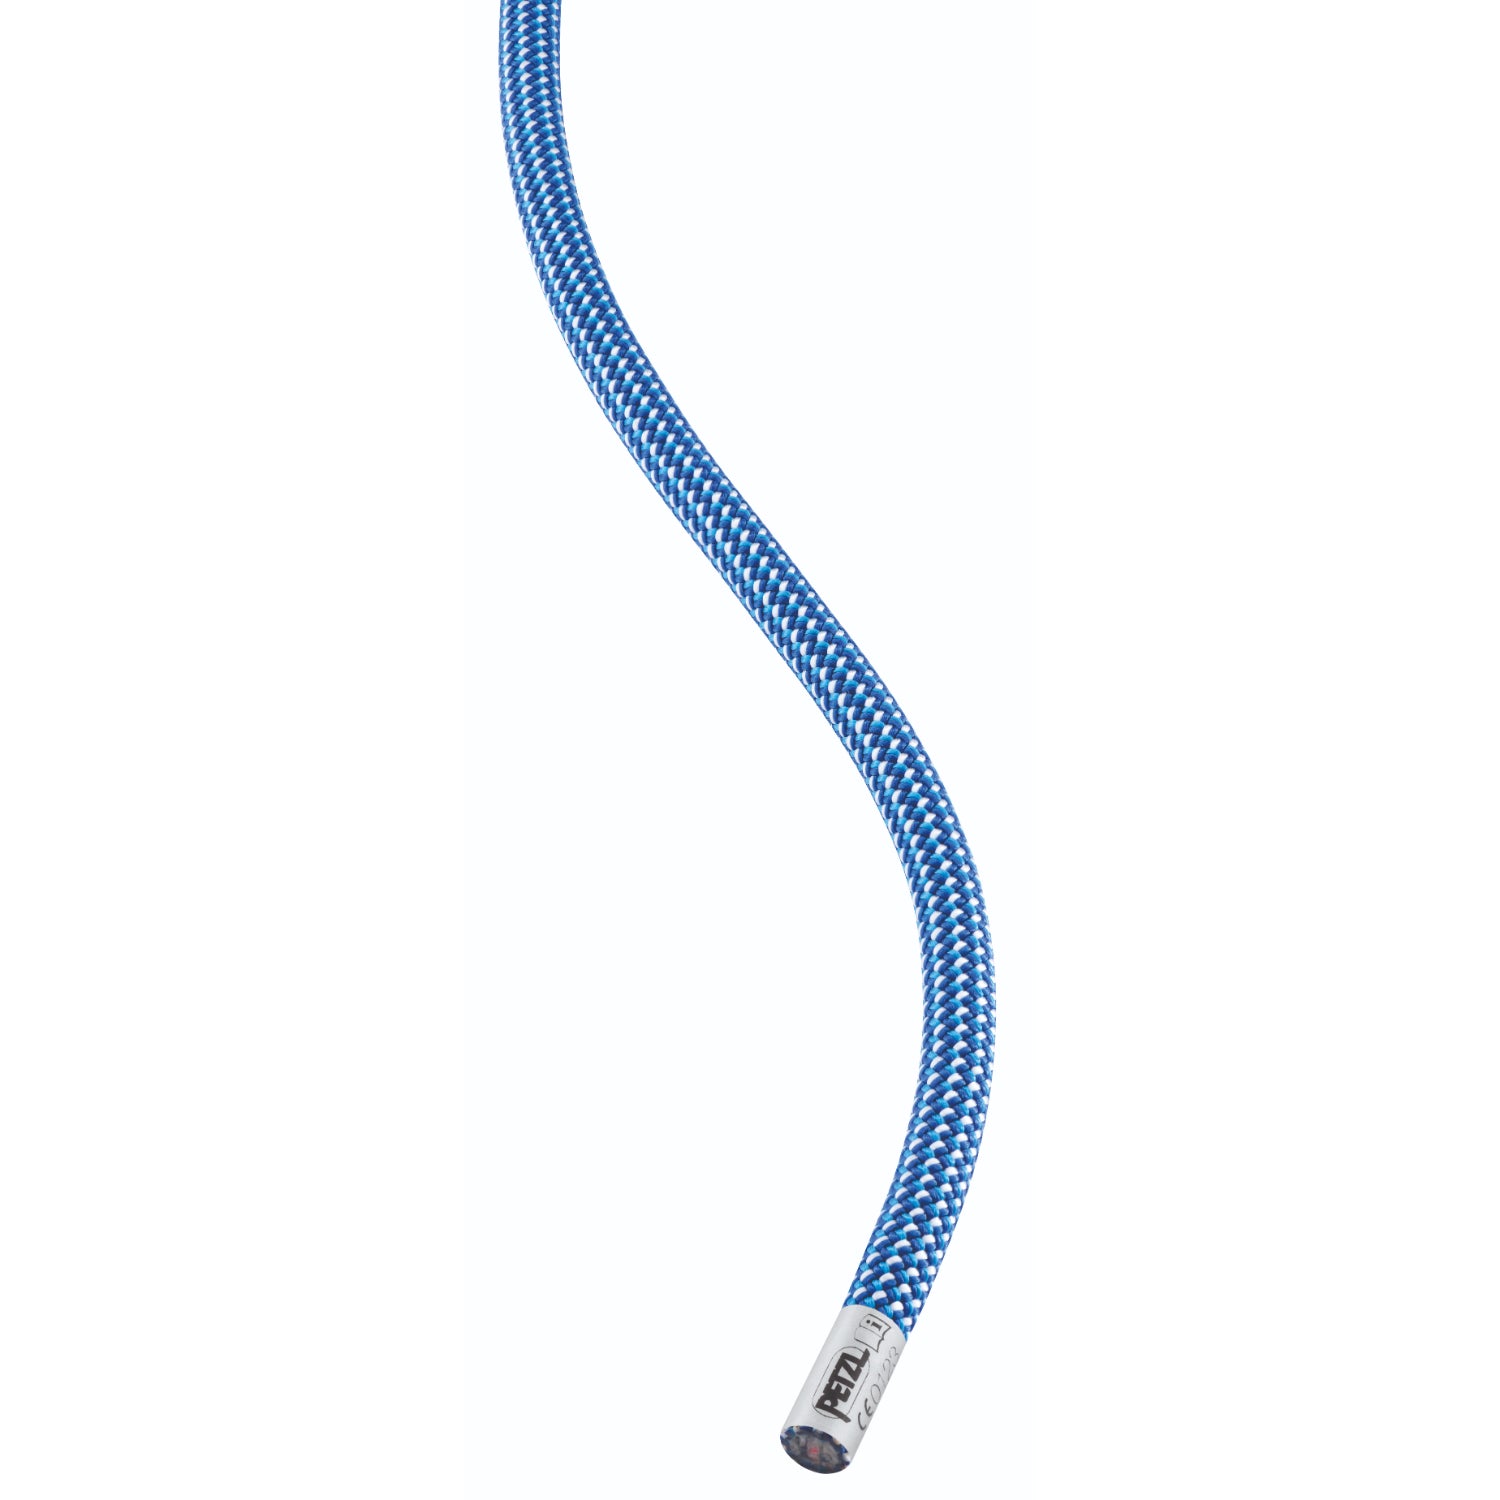 Petzl Contact 9.8mm 80m rope in blue